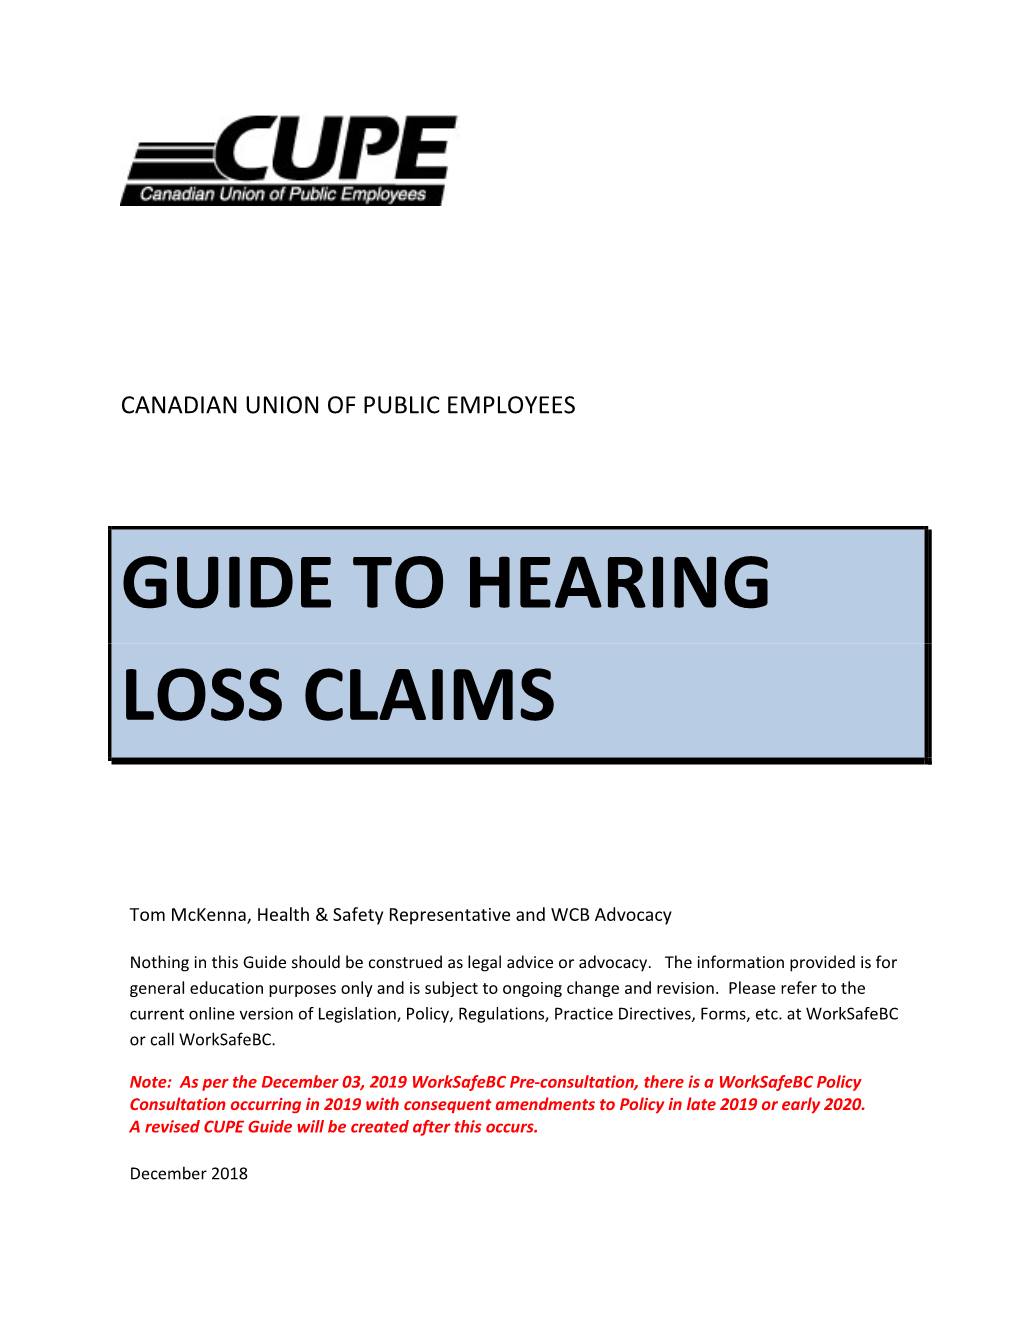 Guide to Hearing Loss Claims